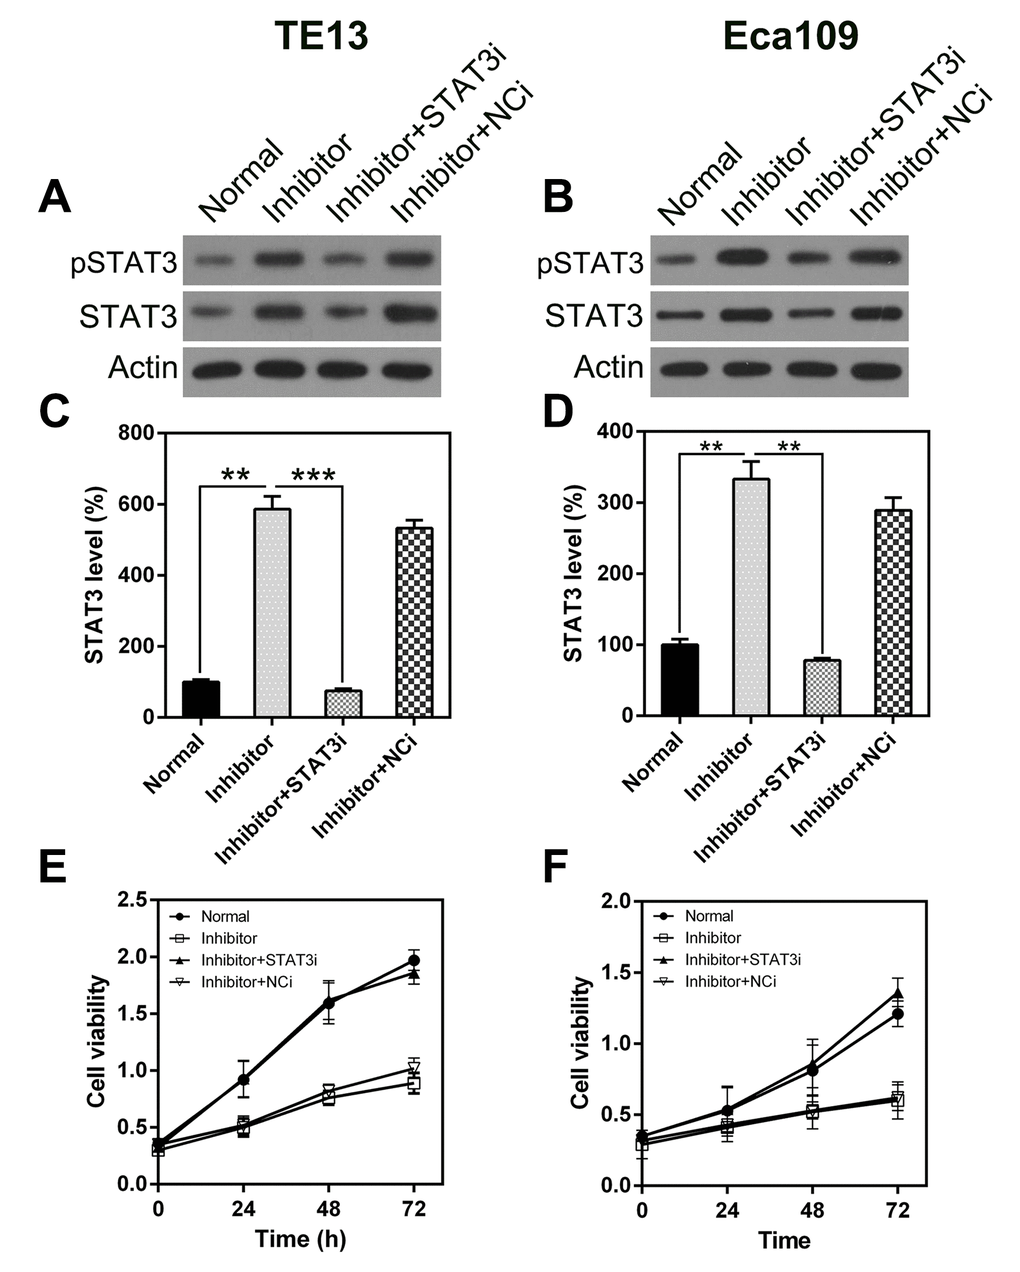 STAT3 silencing rescues the inhibitory effect of miR-126 on ESCC cell proliferation. STAT3 expression was detected in TE13 and Eca109 cells at both the protein (A, B) and mRNA (C, D) levels. STAT3i represents RNA knock-down of STAT3. (E, F) STAT3 knock-down affected the proliferation of TE13 and Eca109 cells.